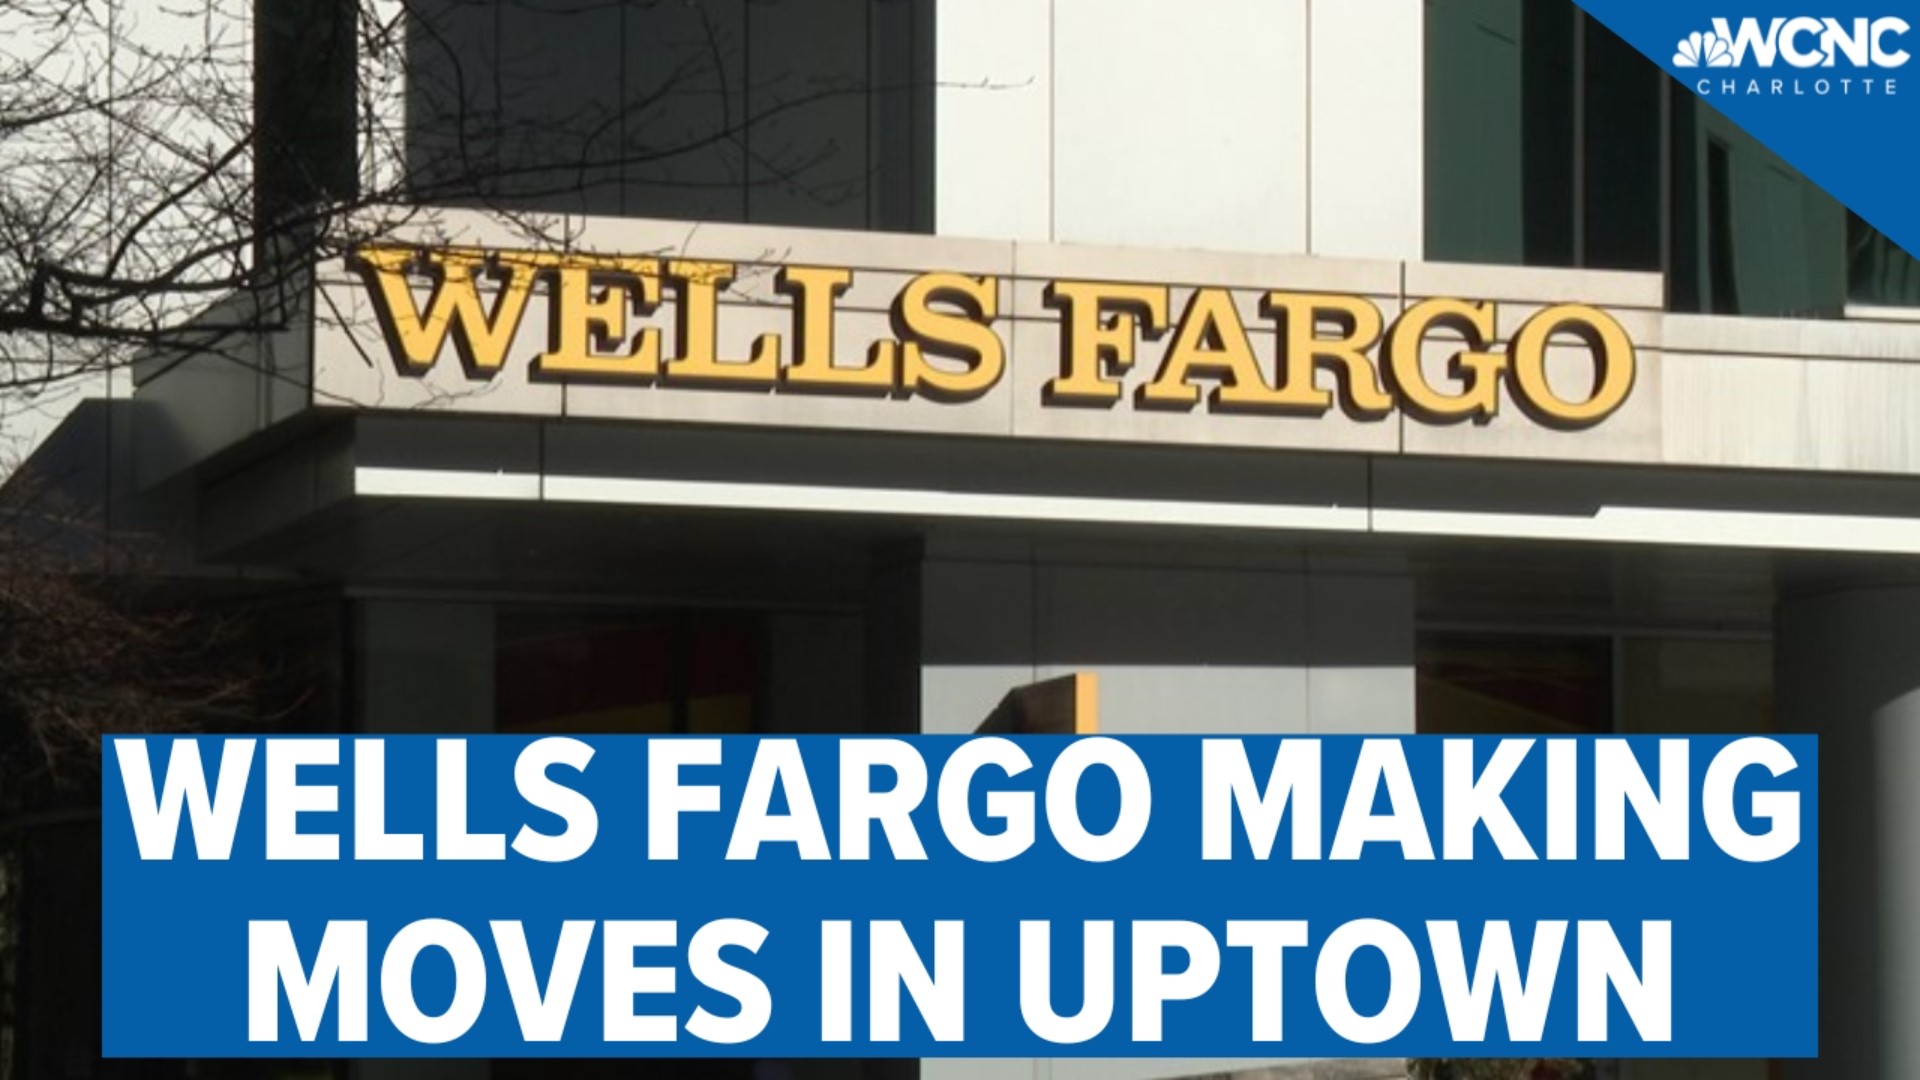 Big changes are in the works for Wells Fargo in the Queen City.